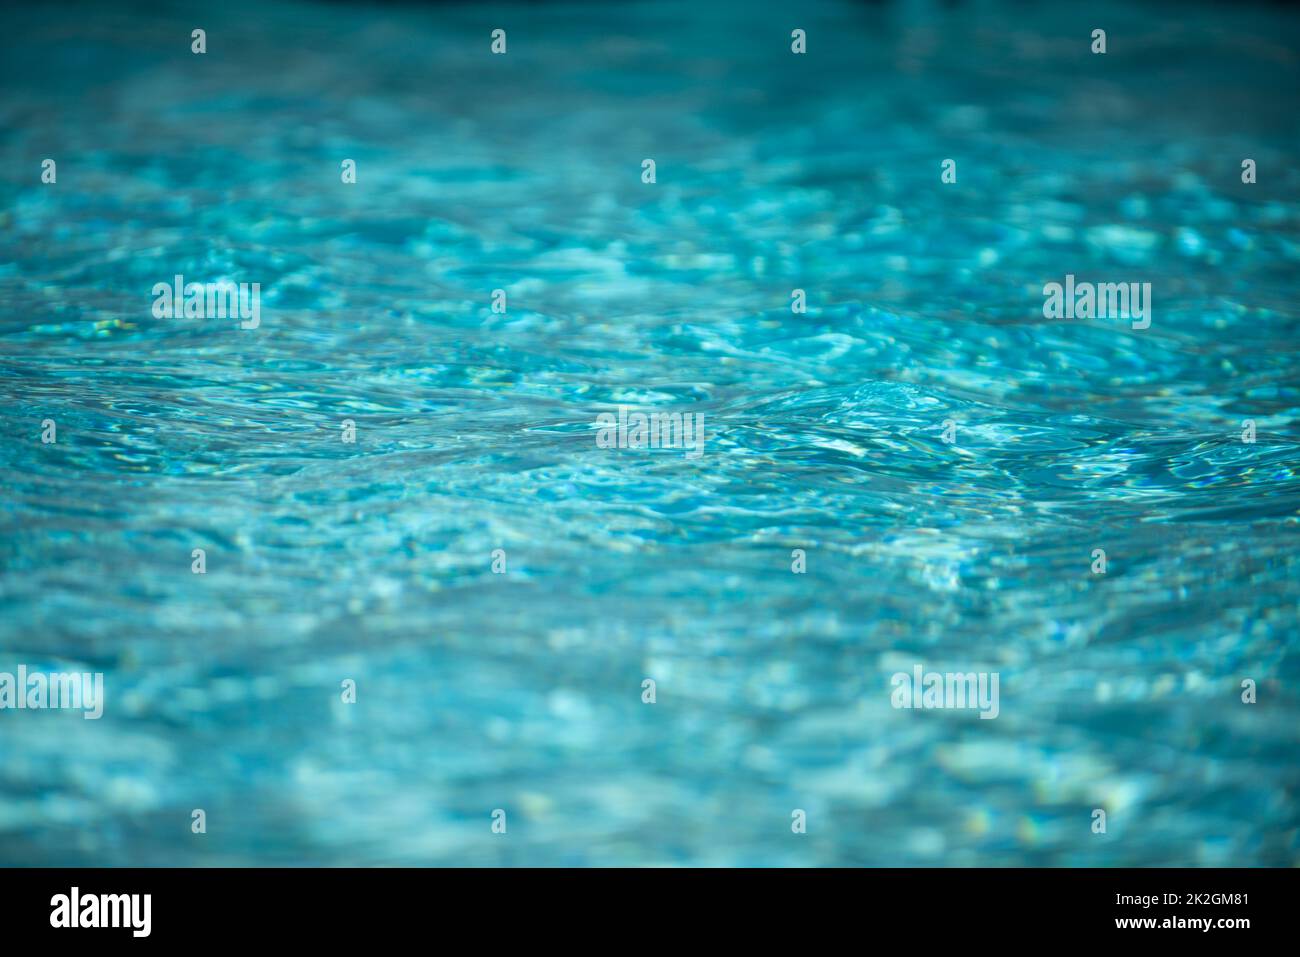 Tansparent clear calm water surface texture. Abstract nature background. Sea water pattern. Stock Photo